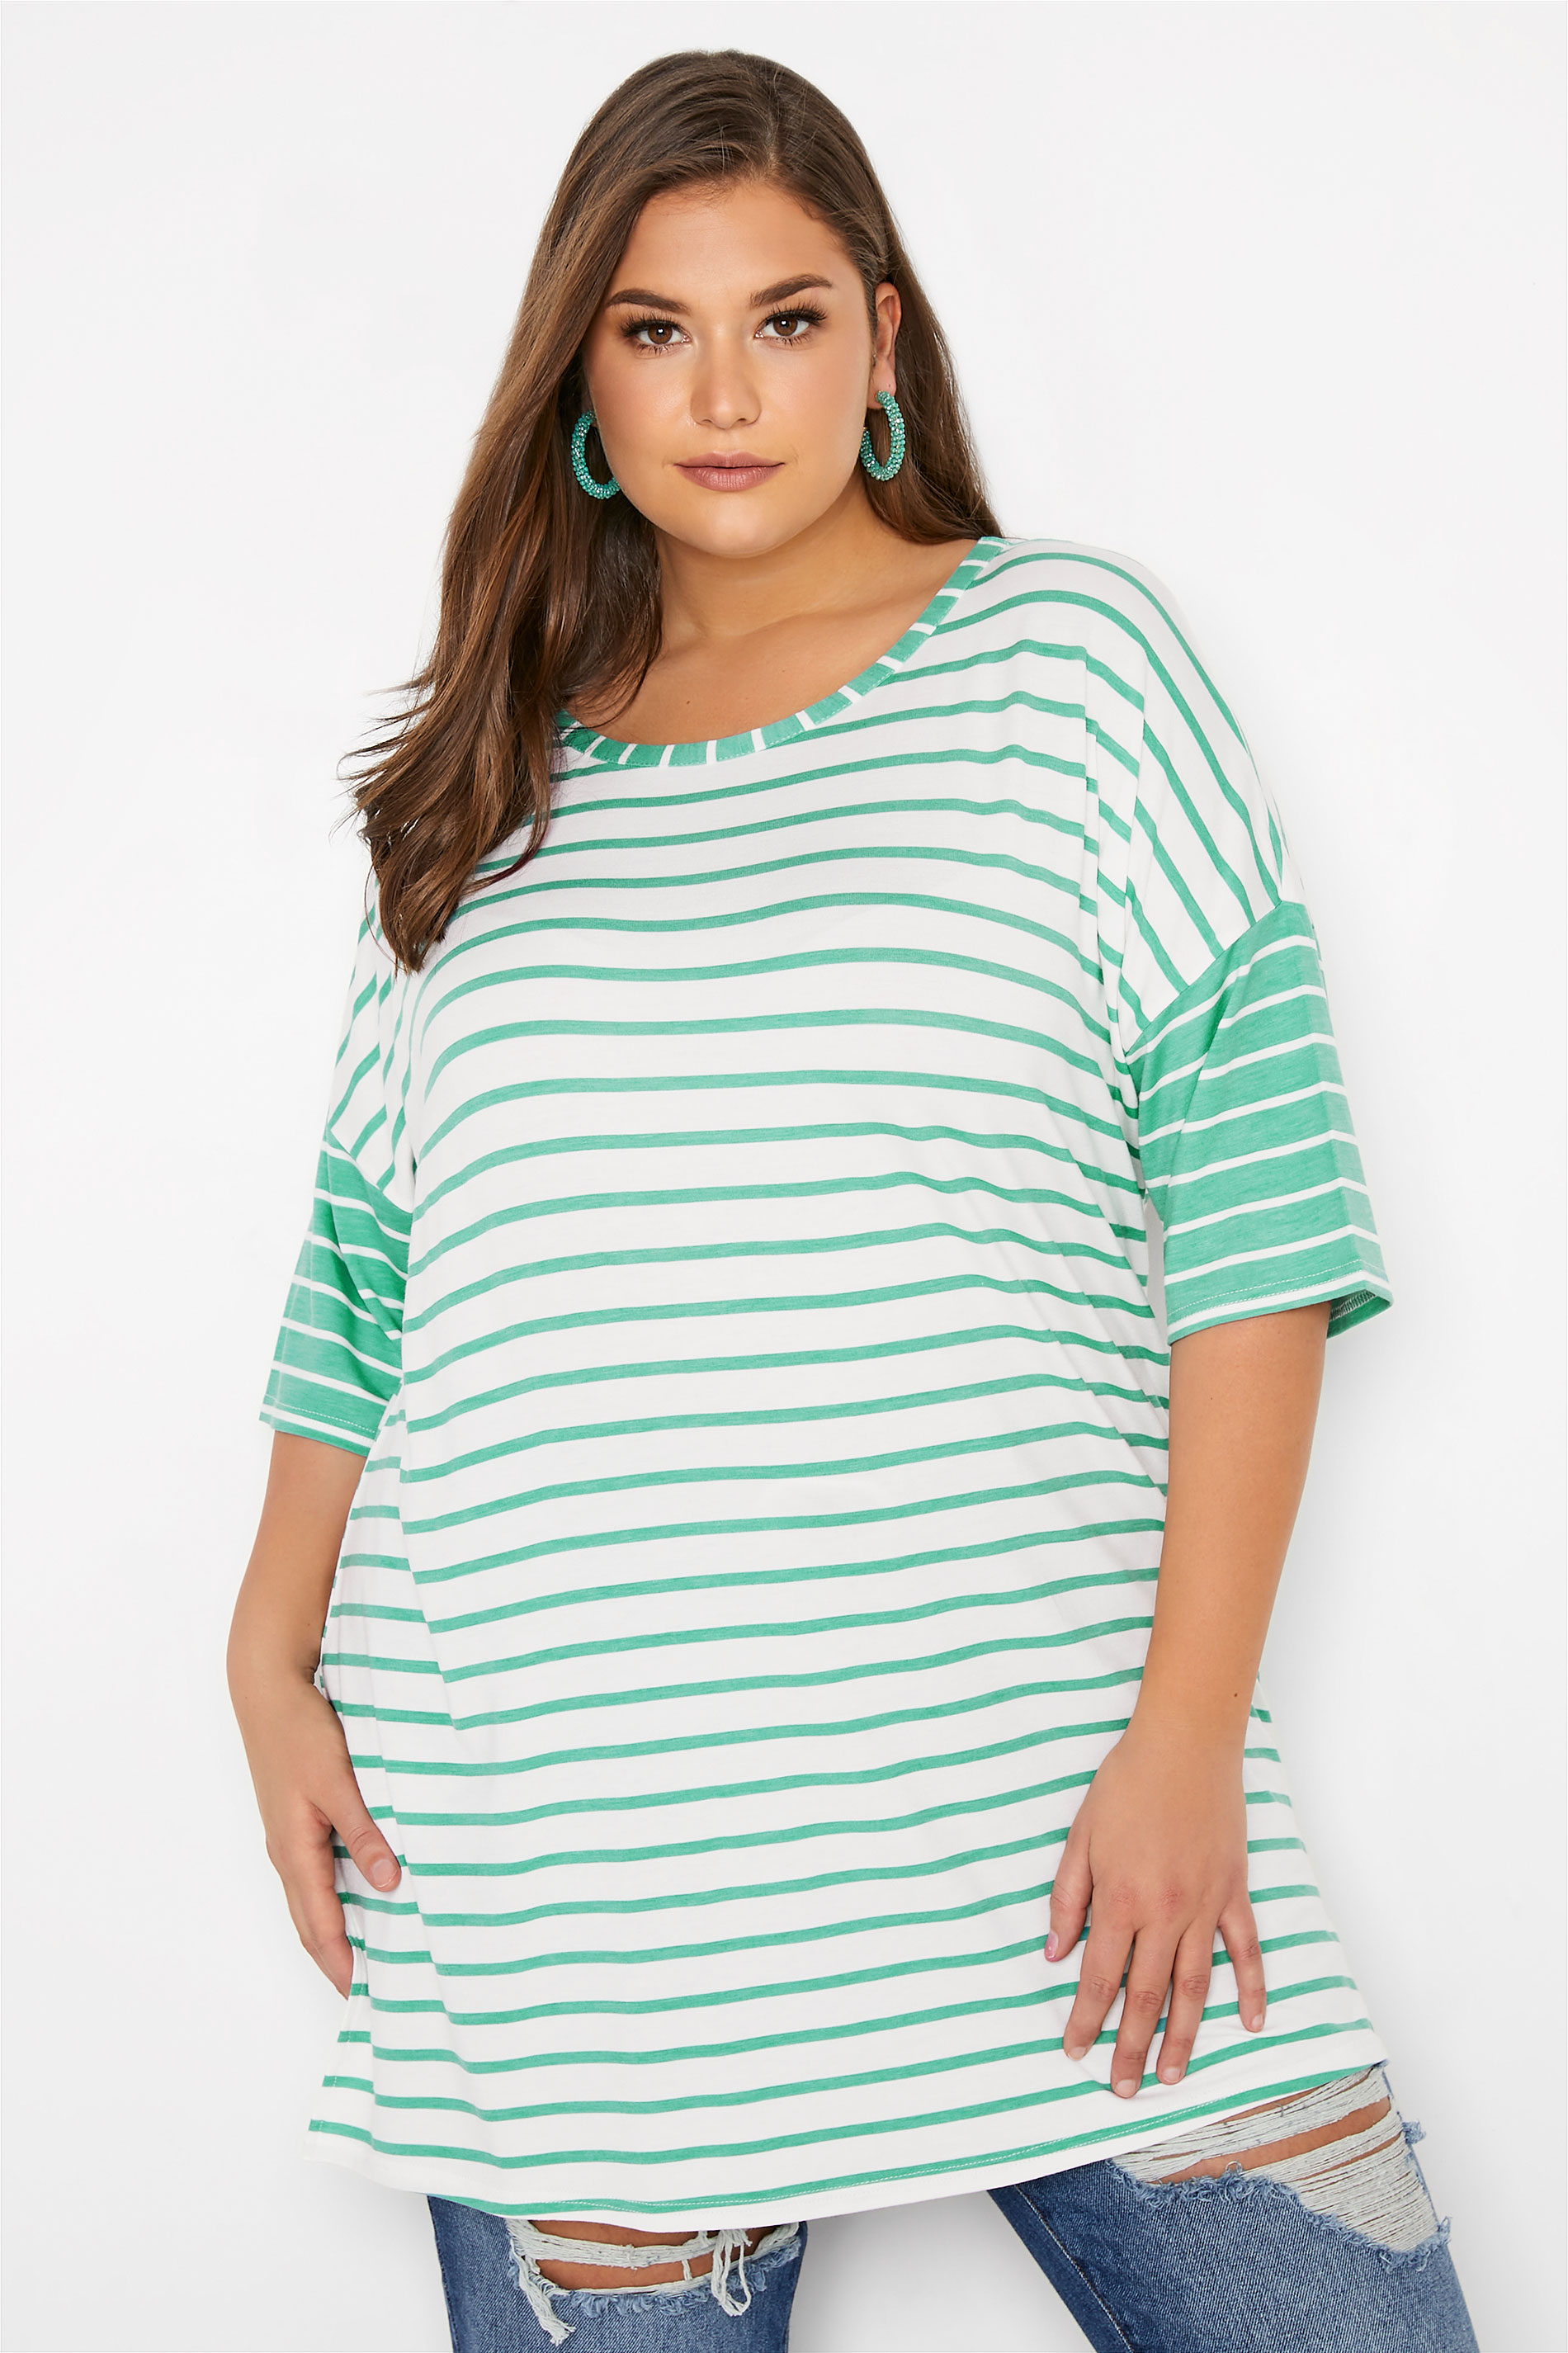 Grande taille  Tops Grande taille  Tops Casual | LIMITED COLLECTION - T-Shirt Oversize Vert & Blanc à Rayures - YH37066